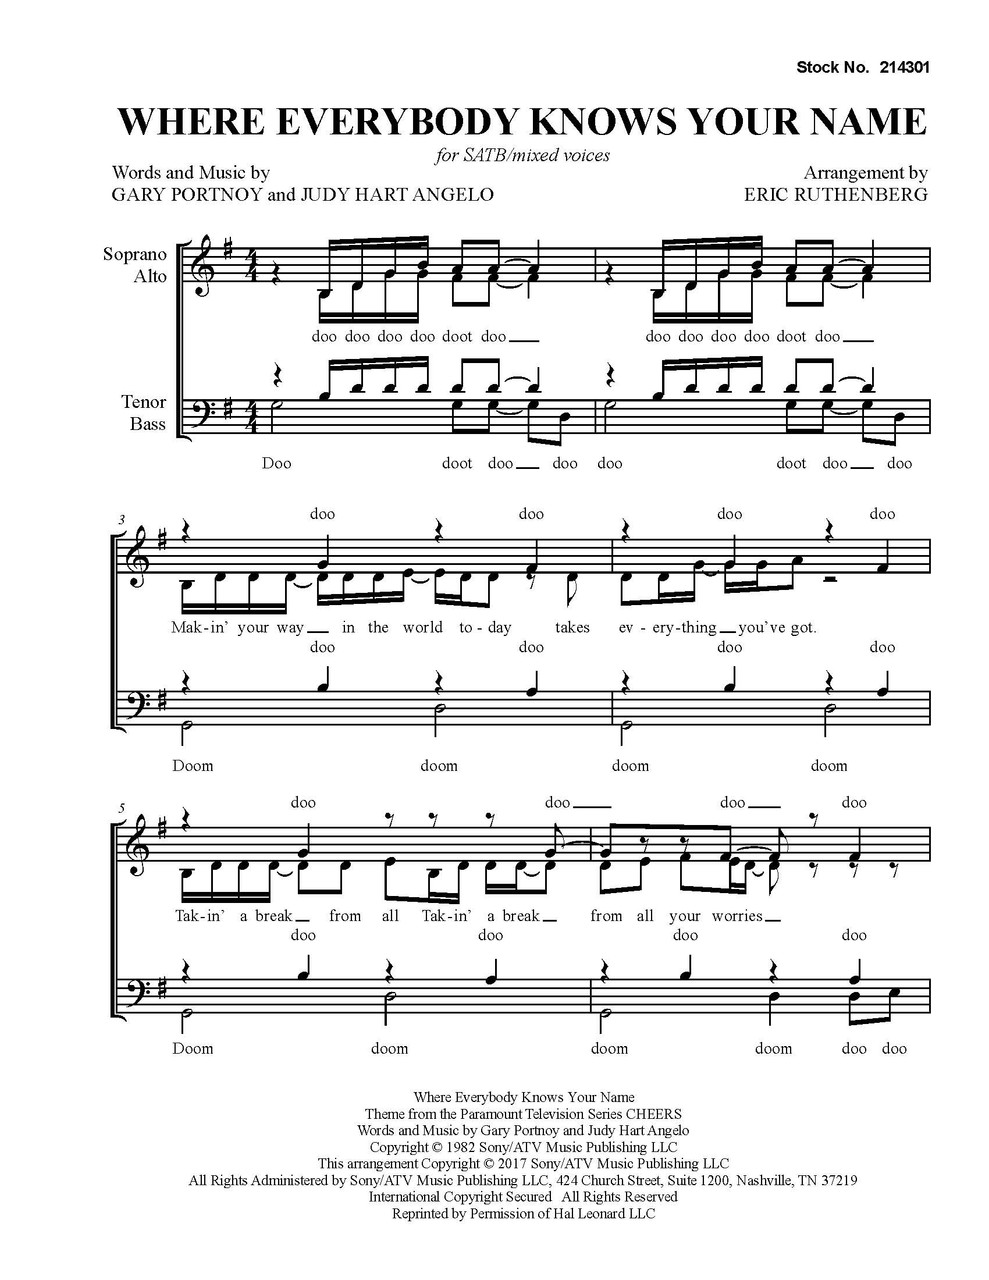 Where Everybody Knows Your Name (Theme from "Cheers") (SATB) (arr. Ruthenberg)